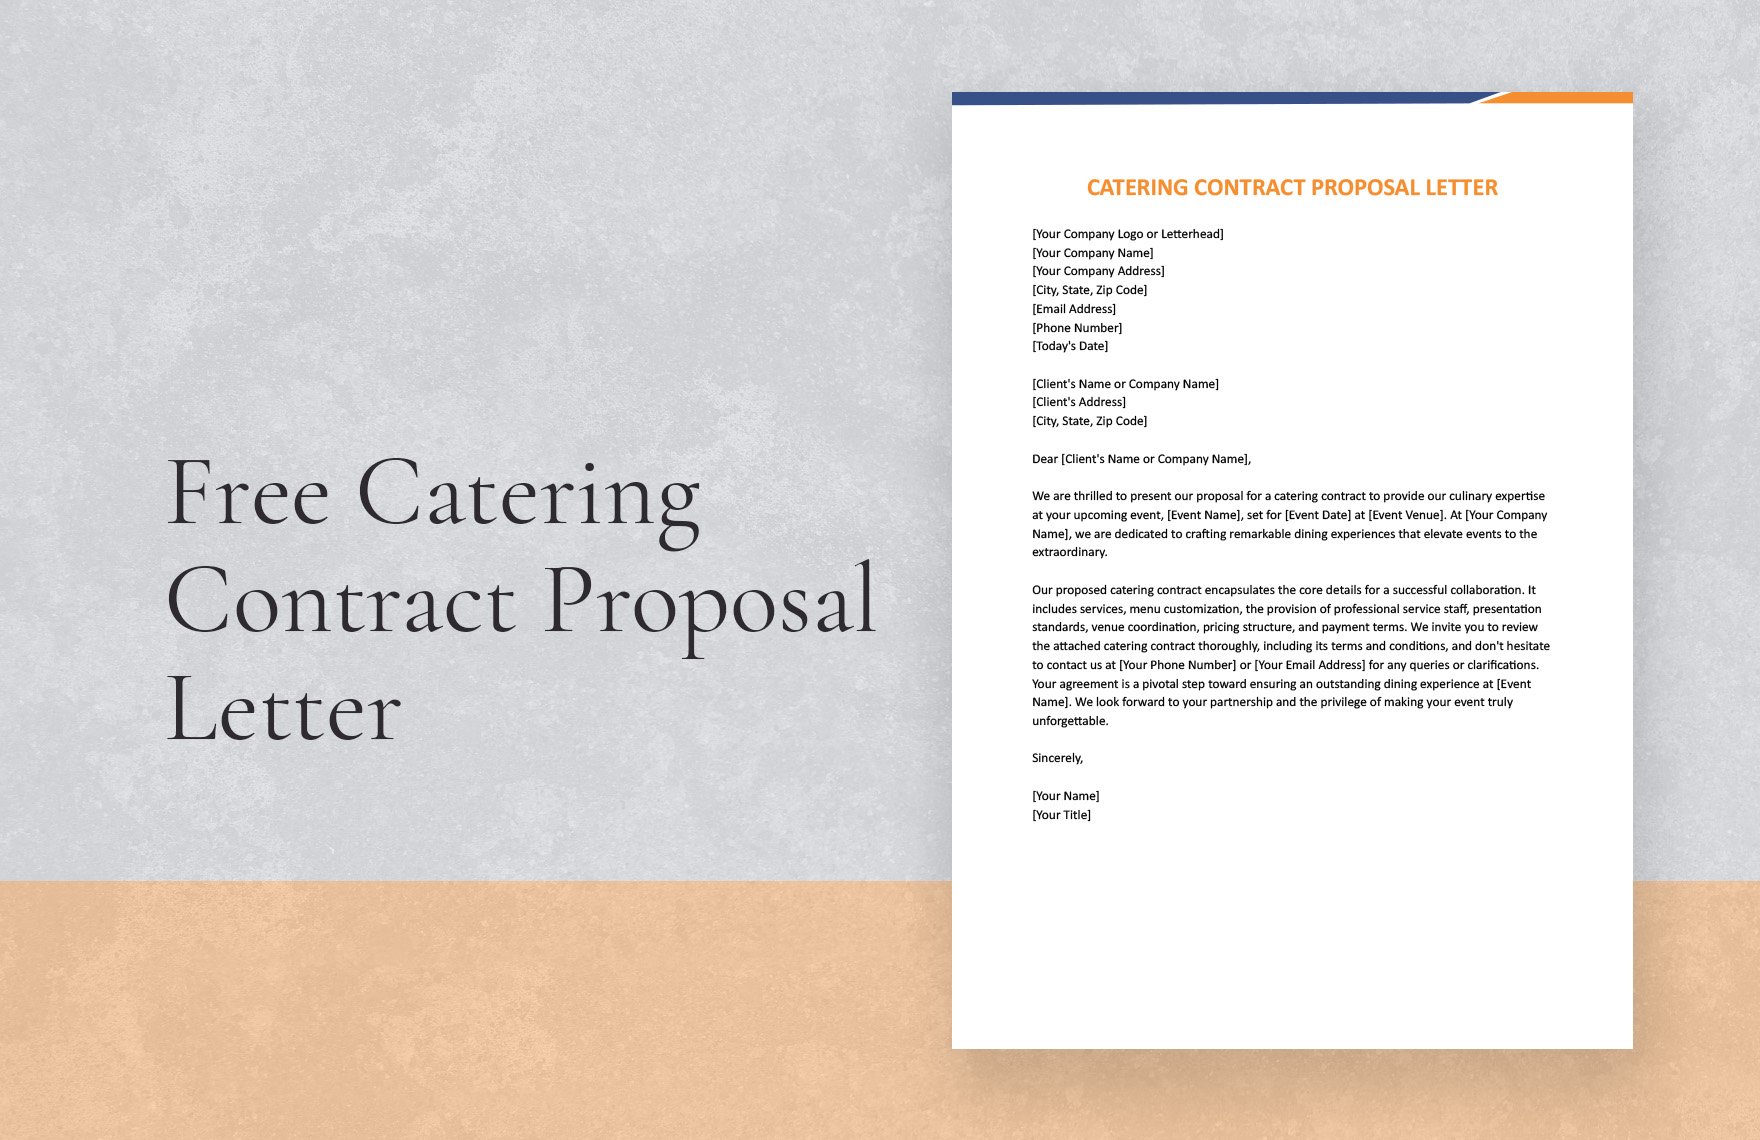 Free Catering Contract Proposal Letter